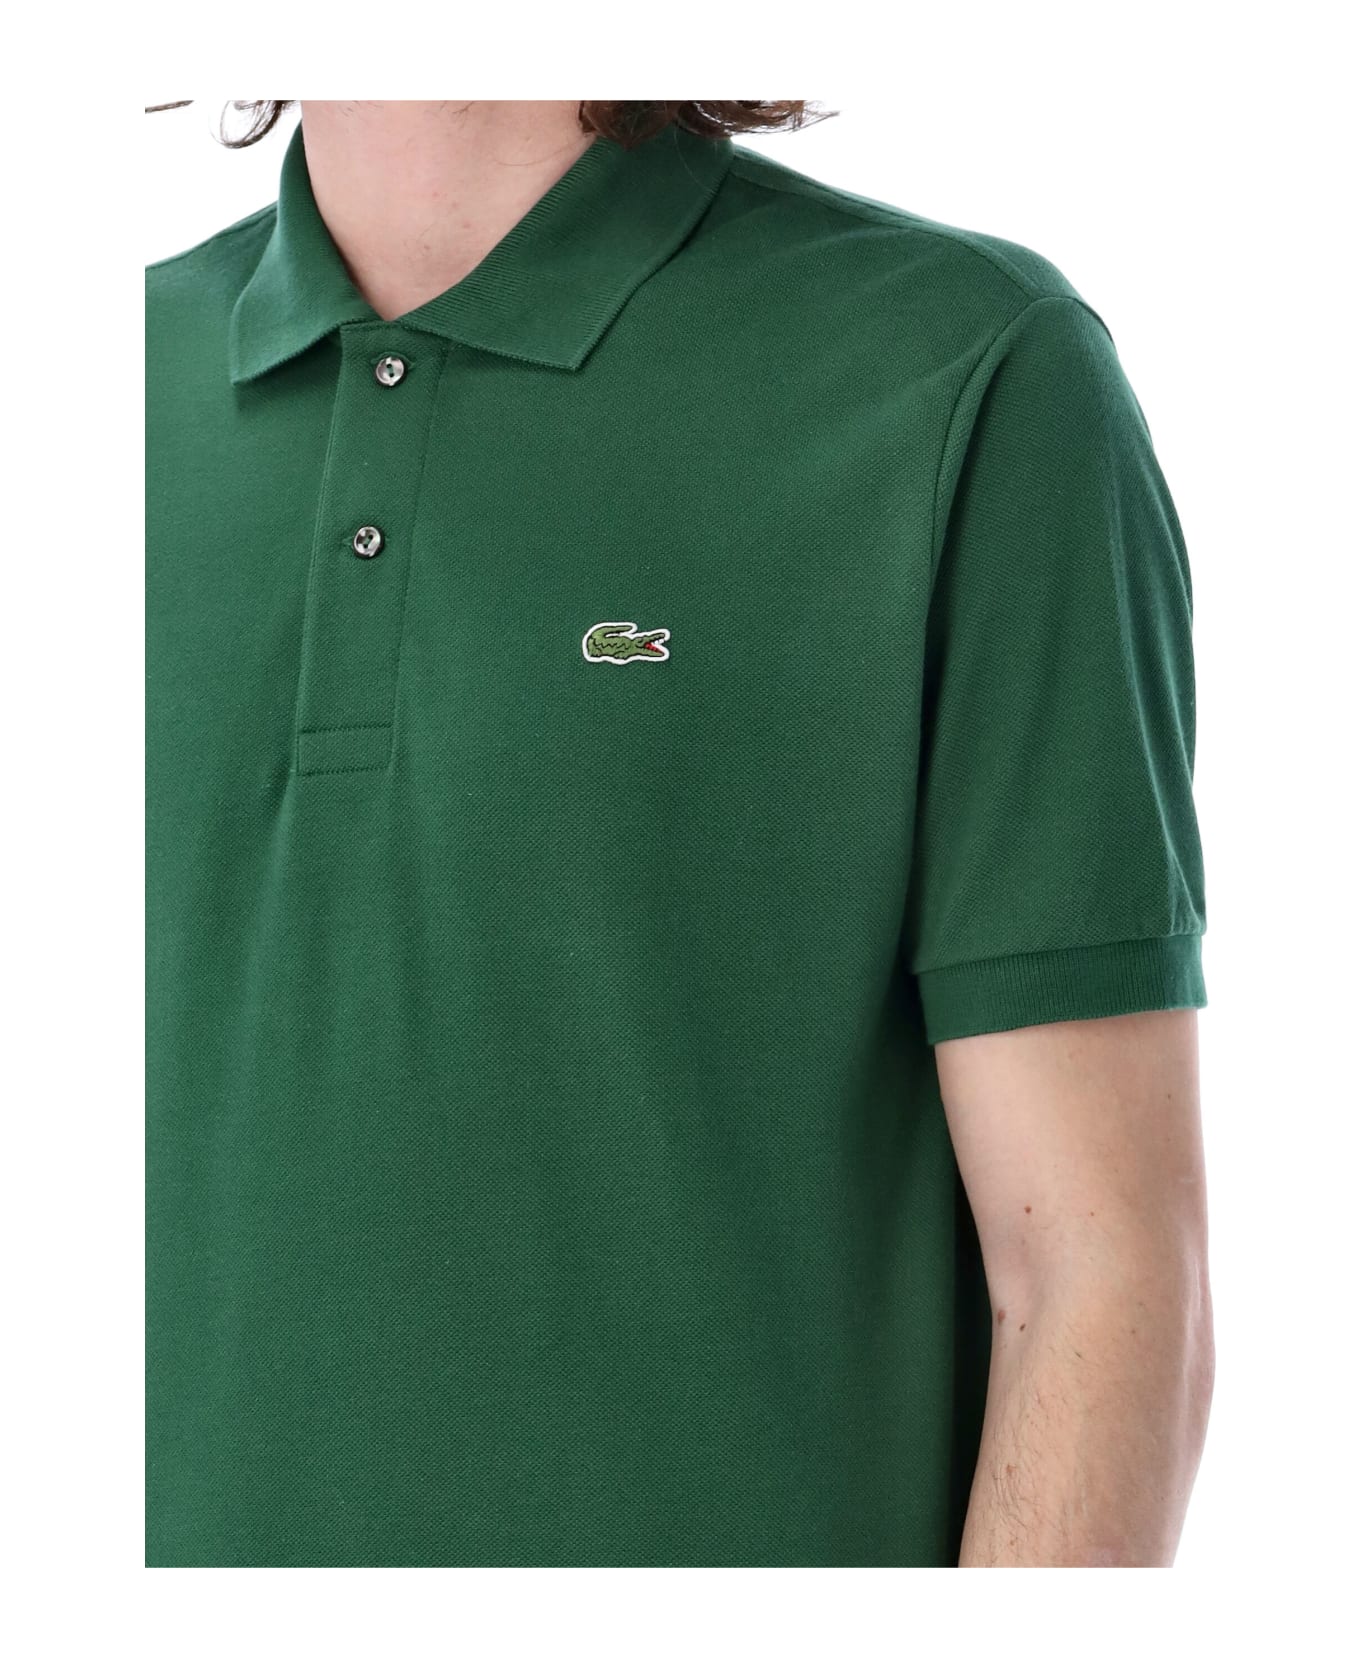 Lacoste Classic Fit Polo Shirt - GREEN ポロシャツ